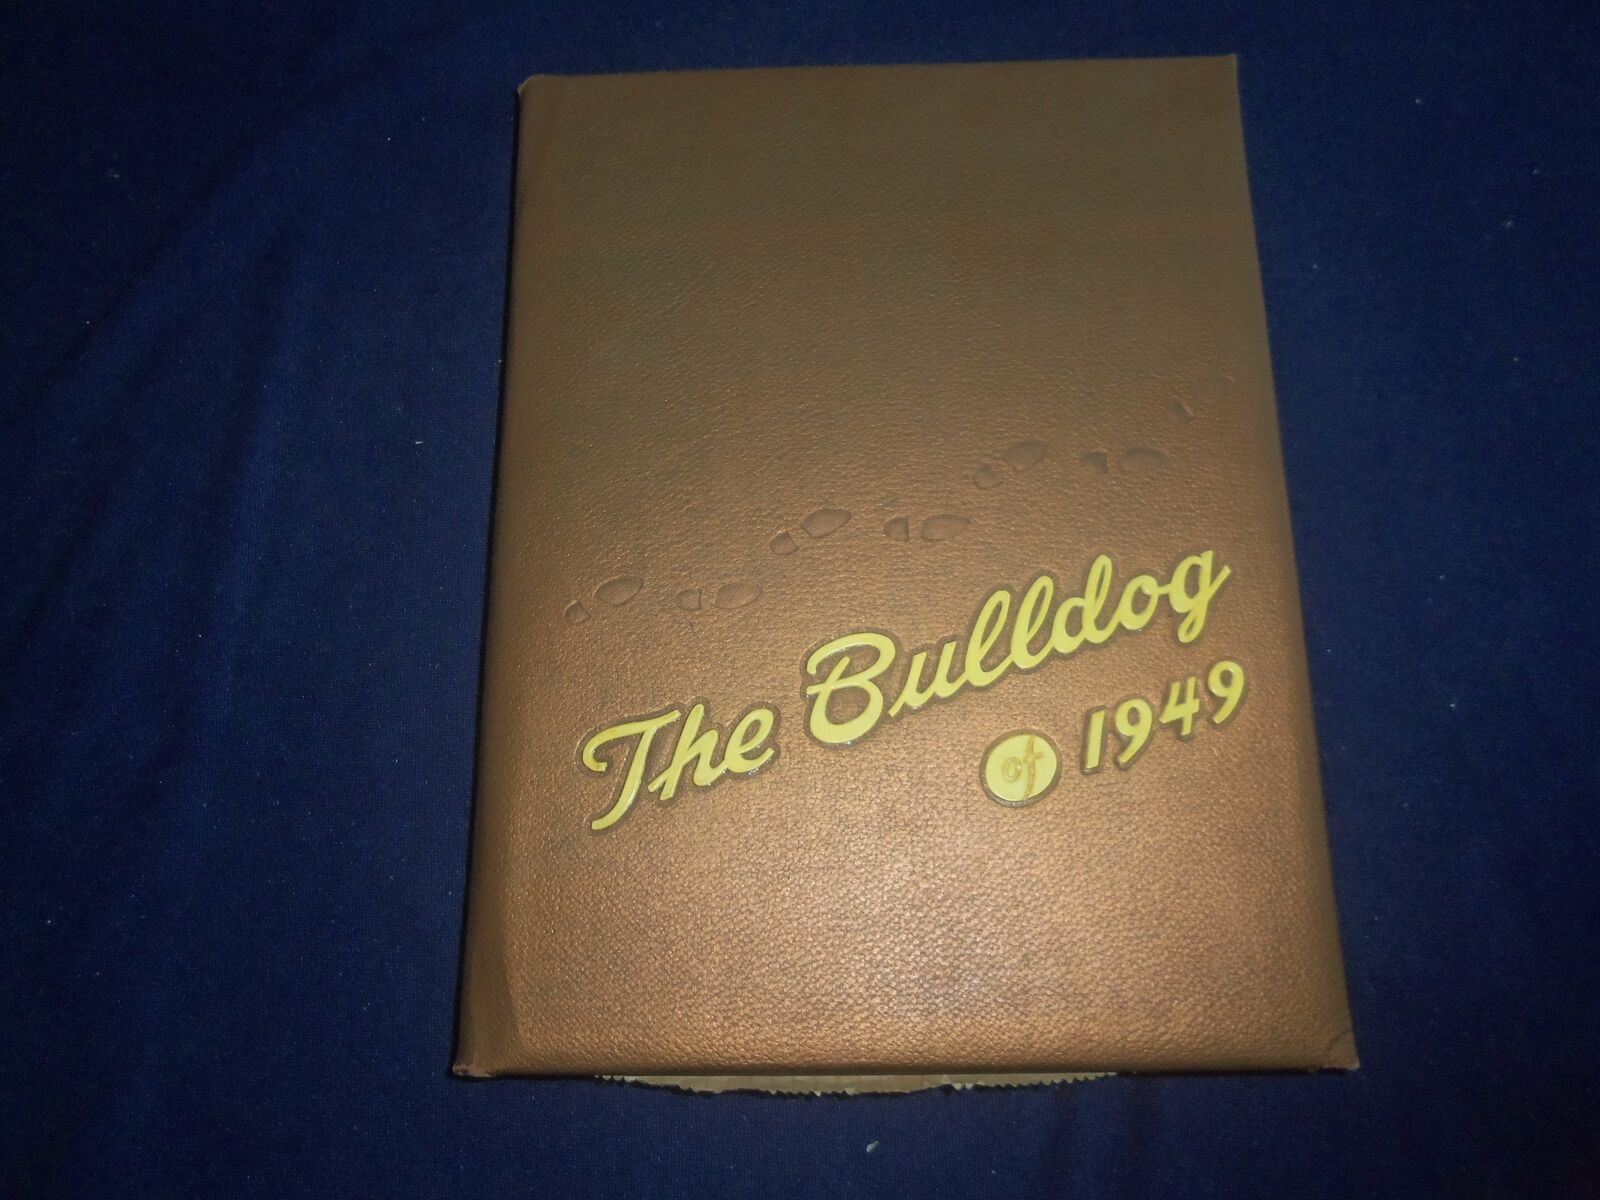 1949 THE BULLDOG SOUTHWESTERN INST. OF TECH. YEARBOOK- WEATHERFORD, OK- YB 2359